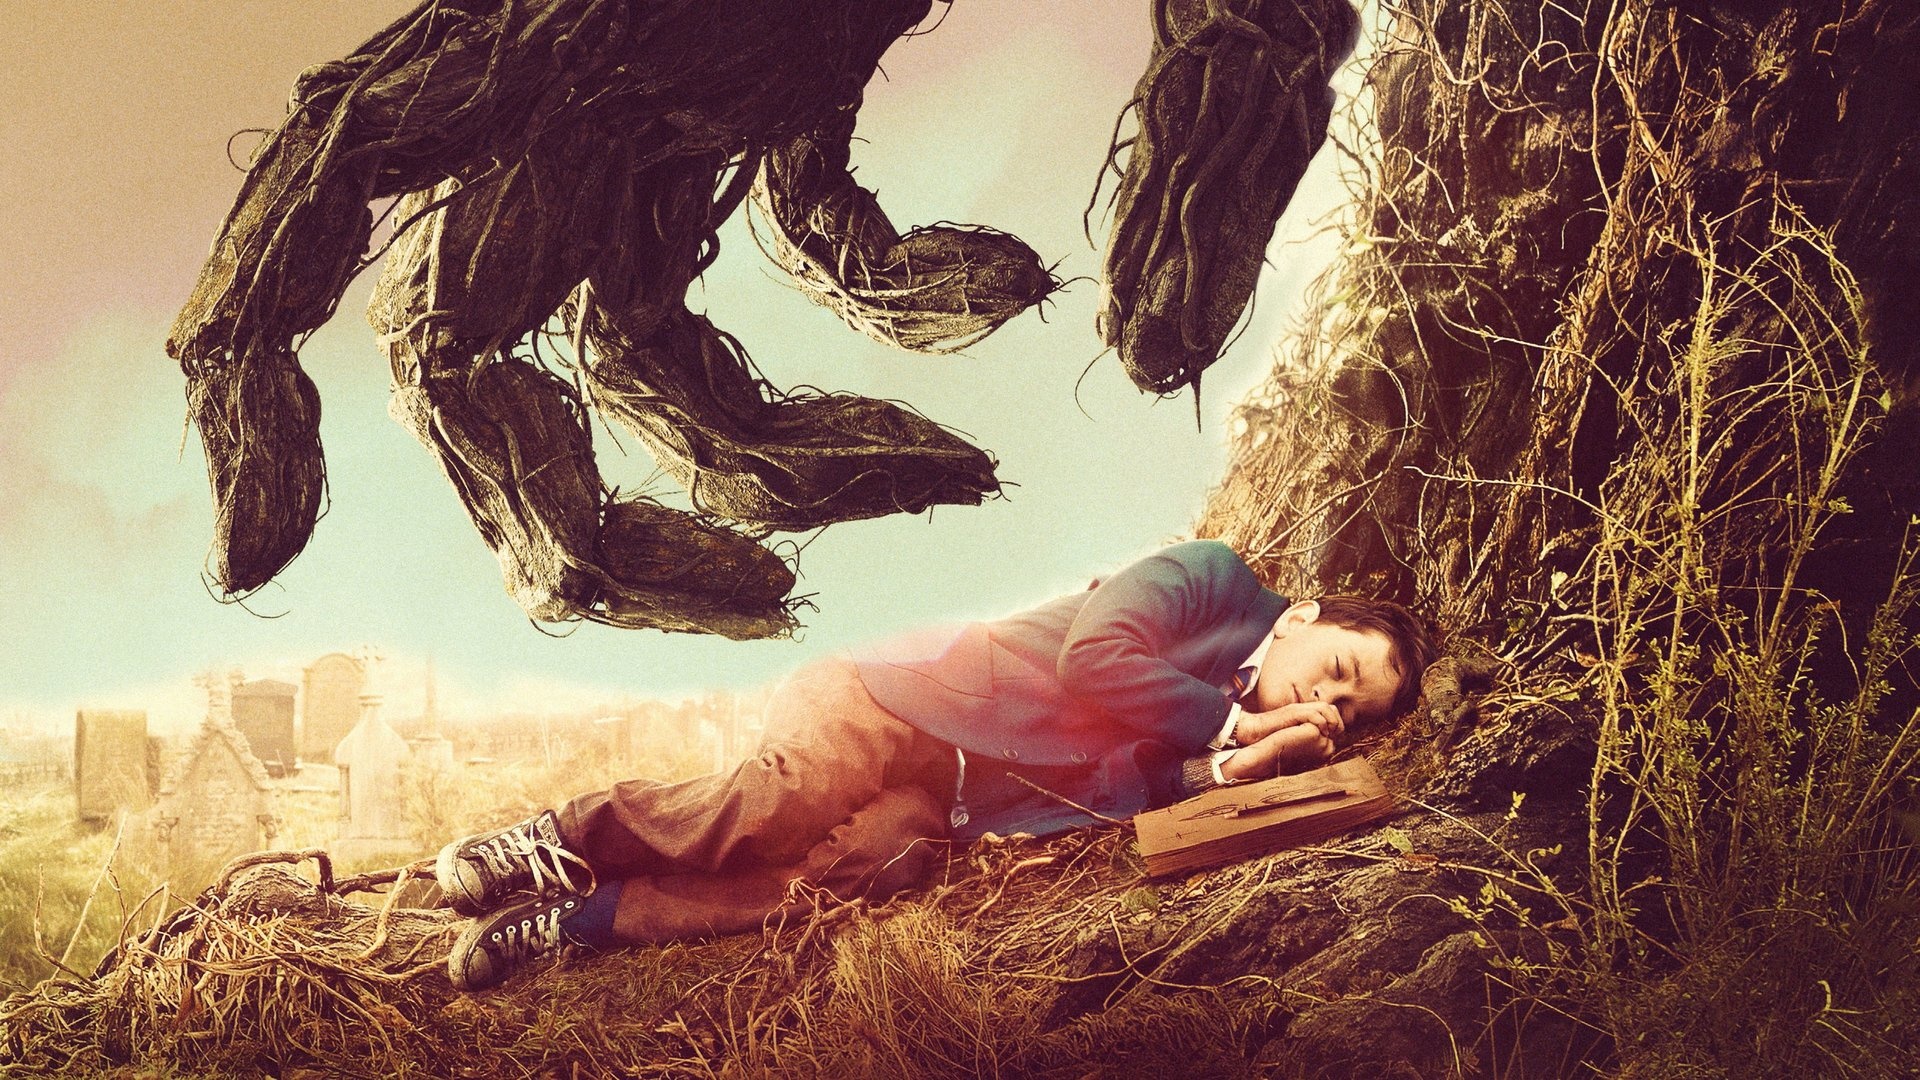 Movie poster A Monster Calls